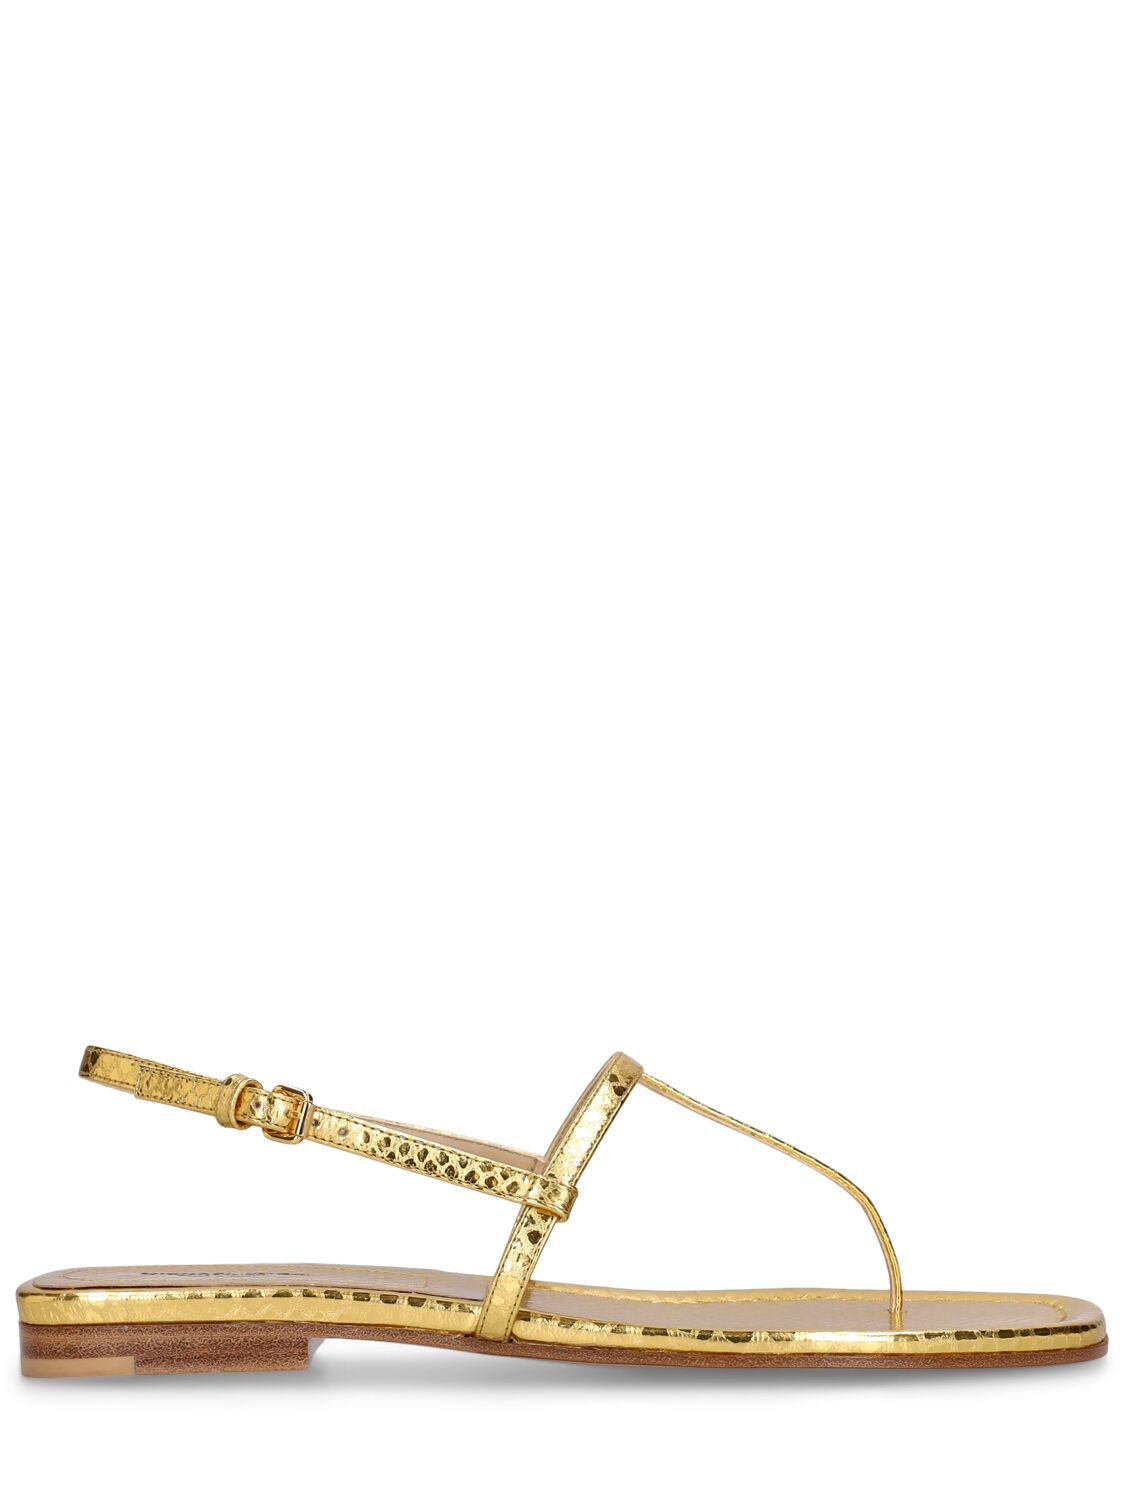 Michael Kors 10mm Ali Python Print Leather Sandals In Gold